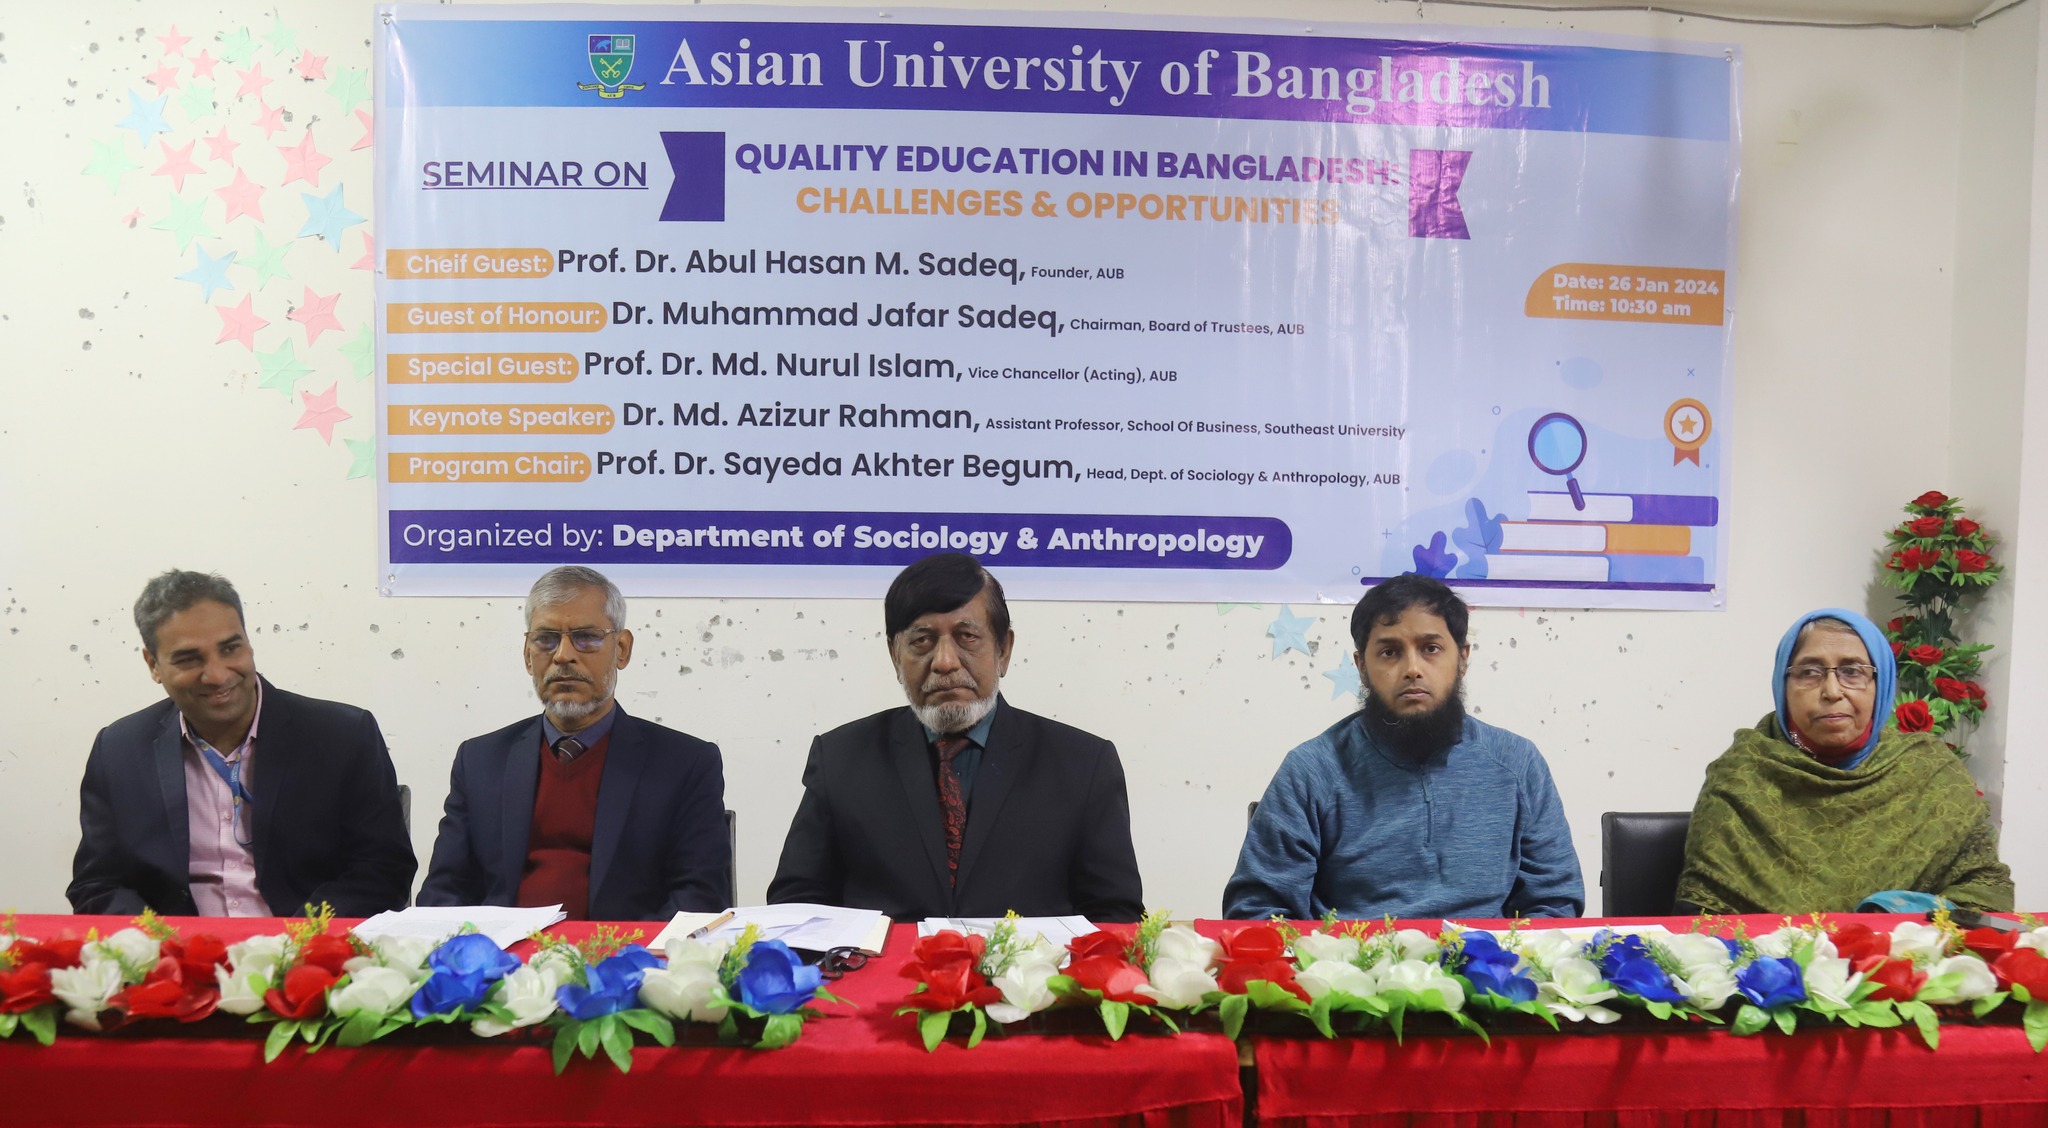 Seminar on Quality Education in Bangladesh: Challenges & Opportunities